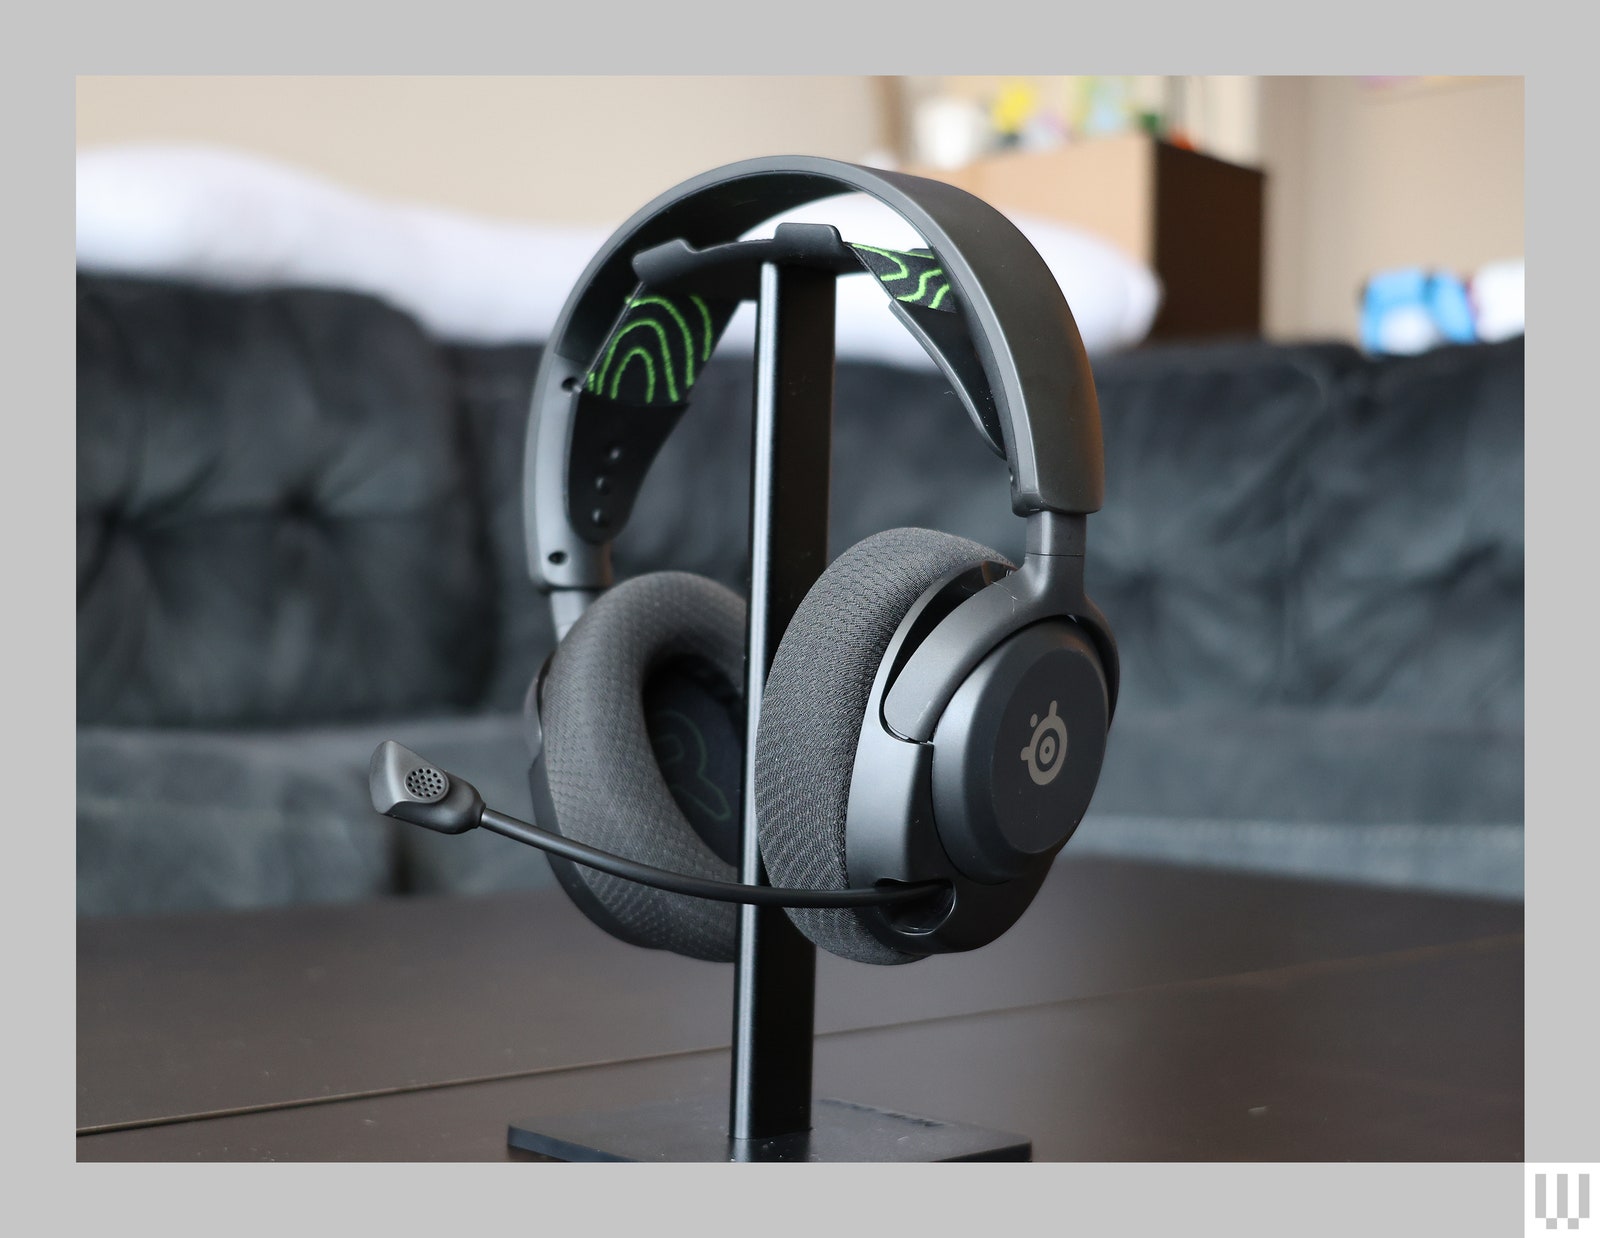 Black headset with cushioned ear cups padded headband and extended mic hooked on a tabletop stand